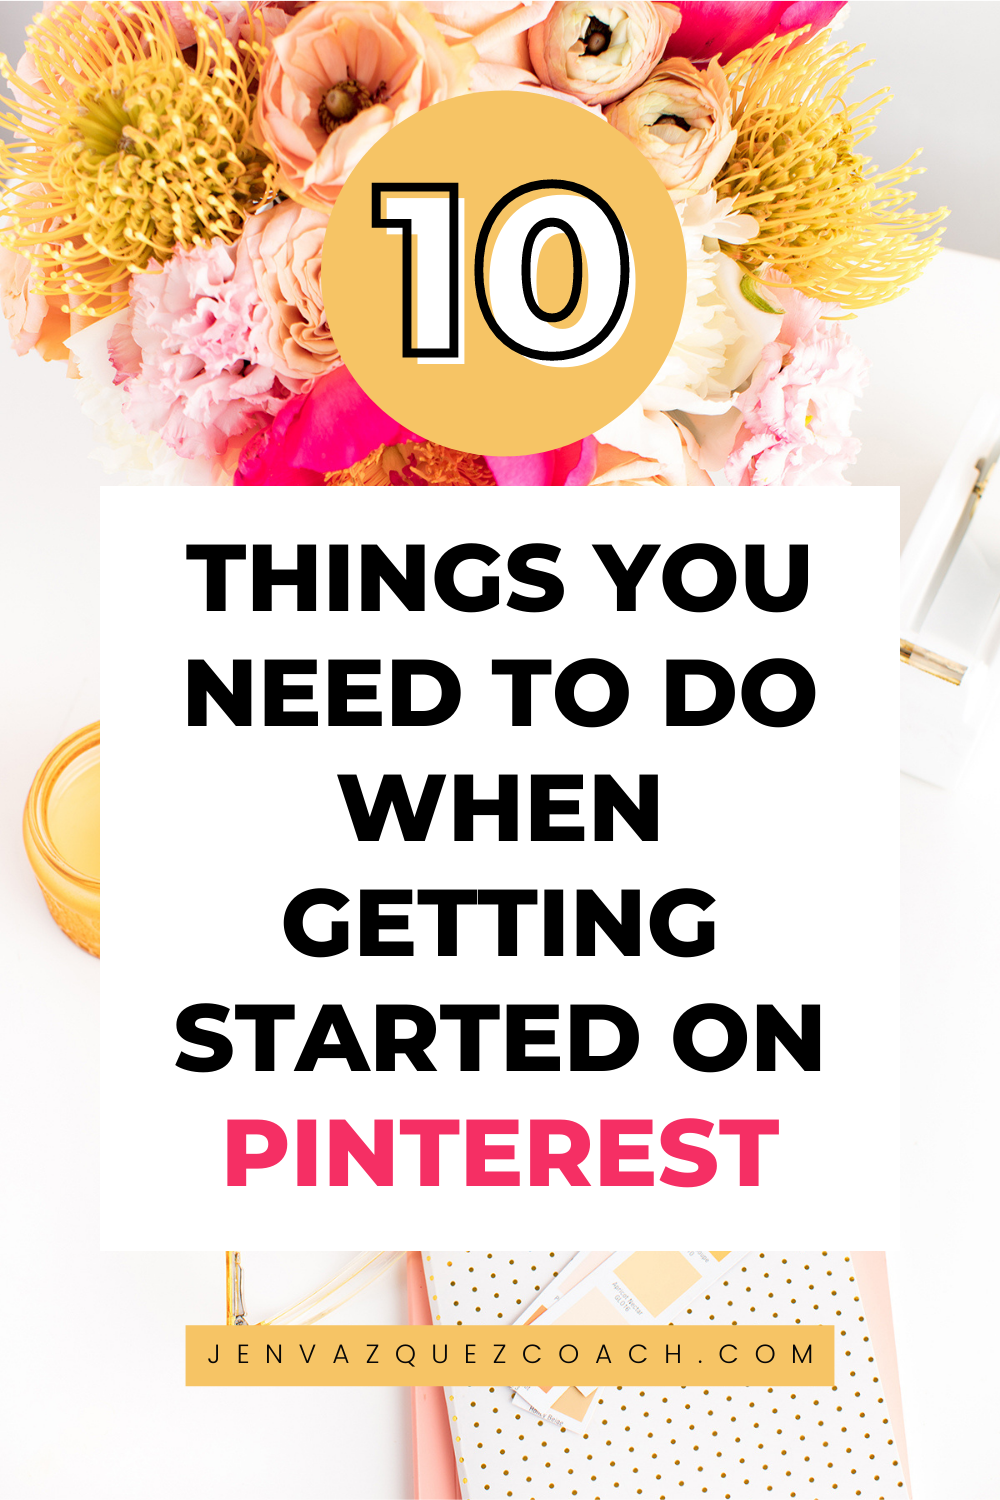 10 Things You Need to Do When Getting Started on Pinterest by Jen Vazquez